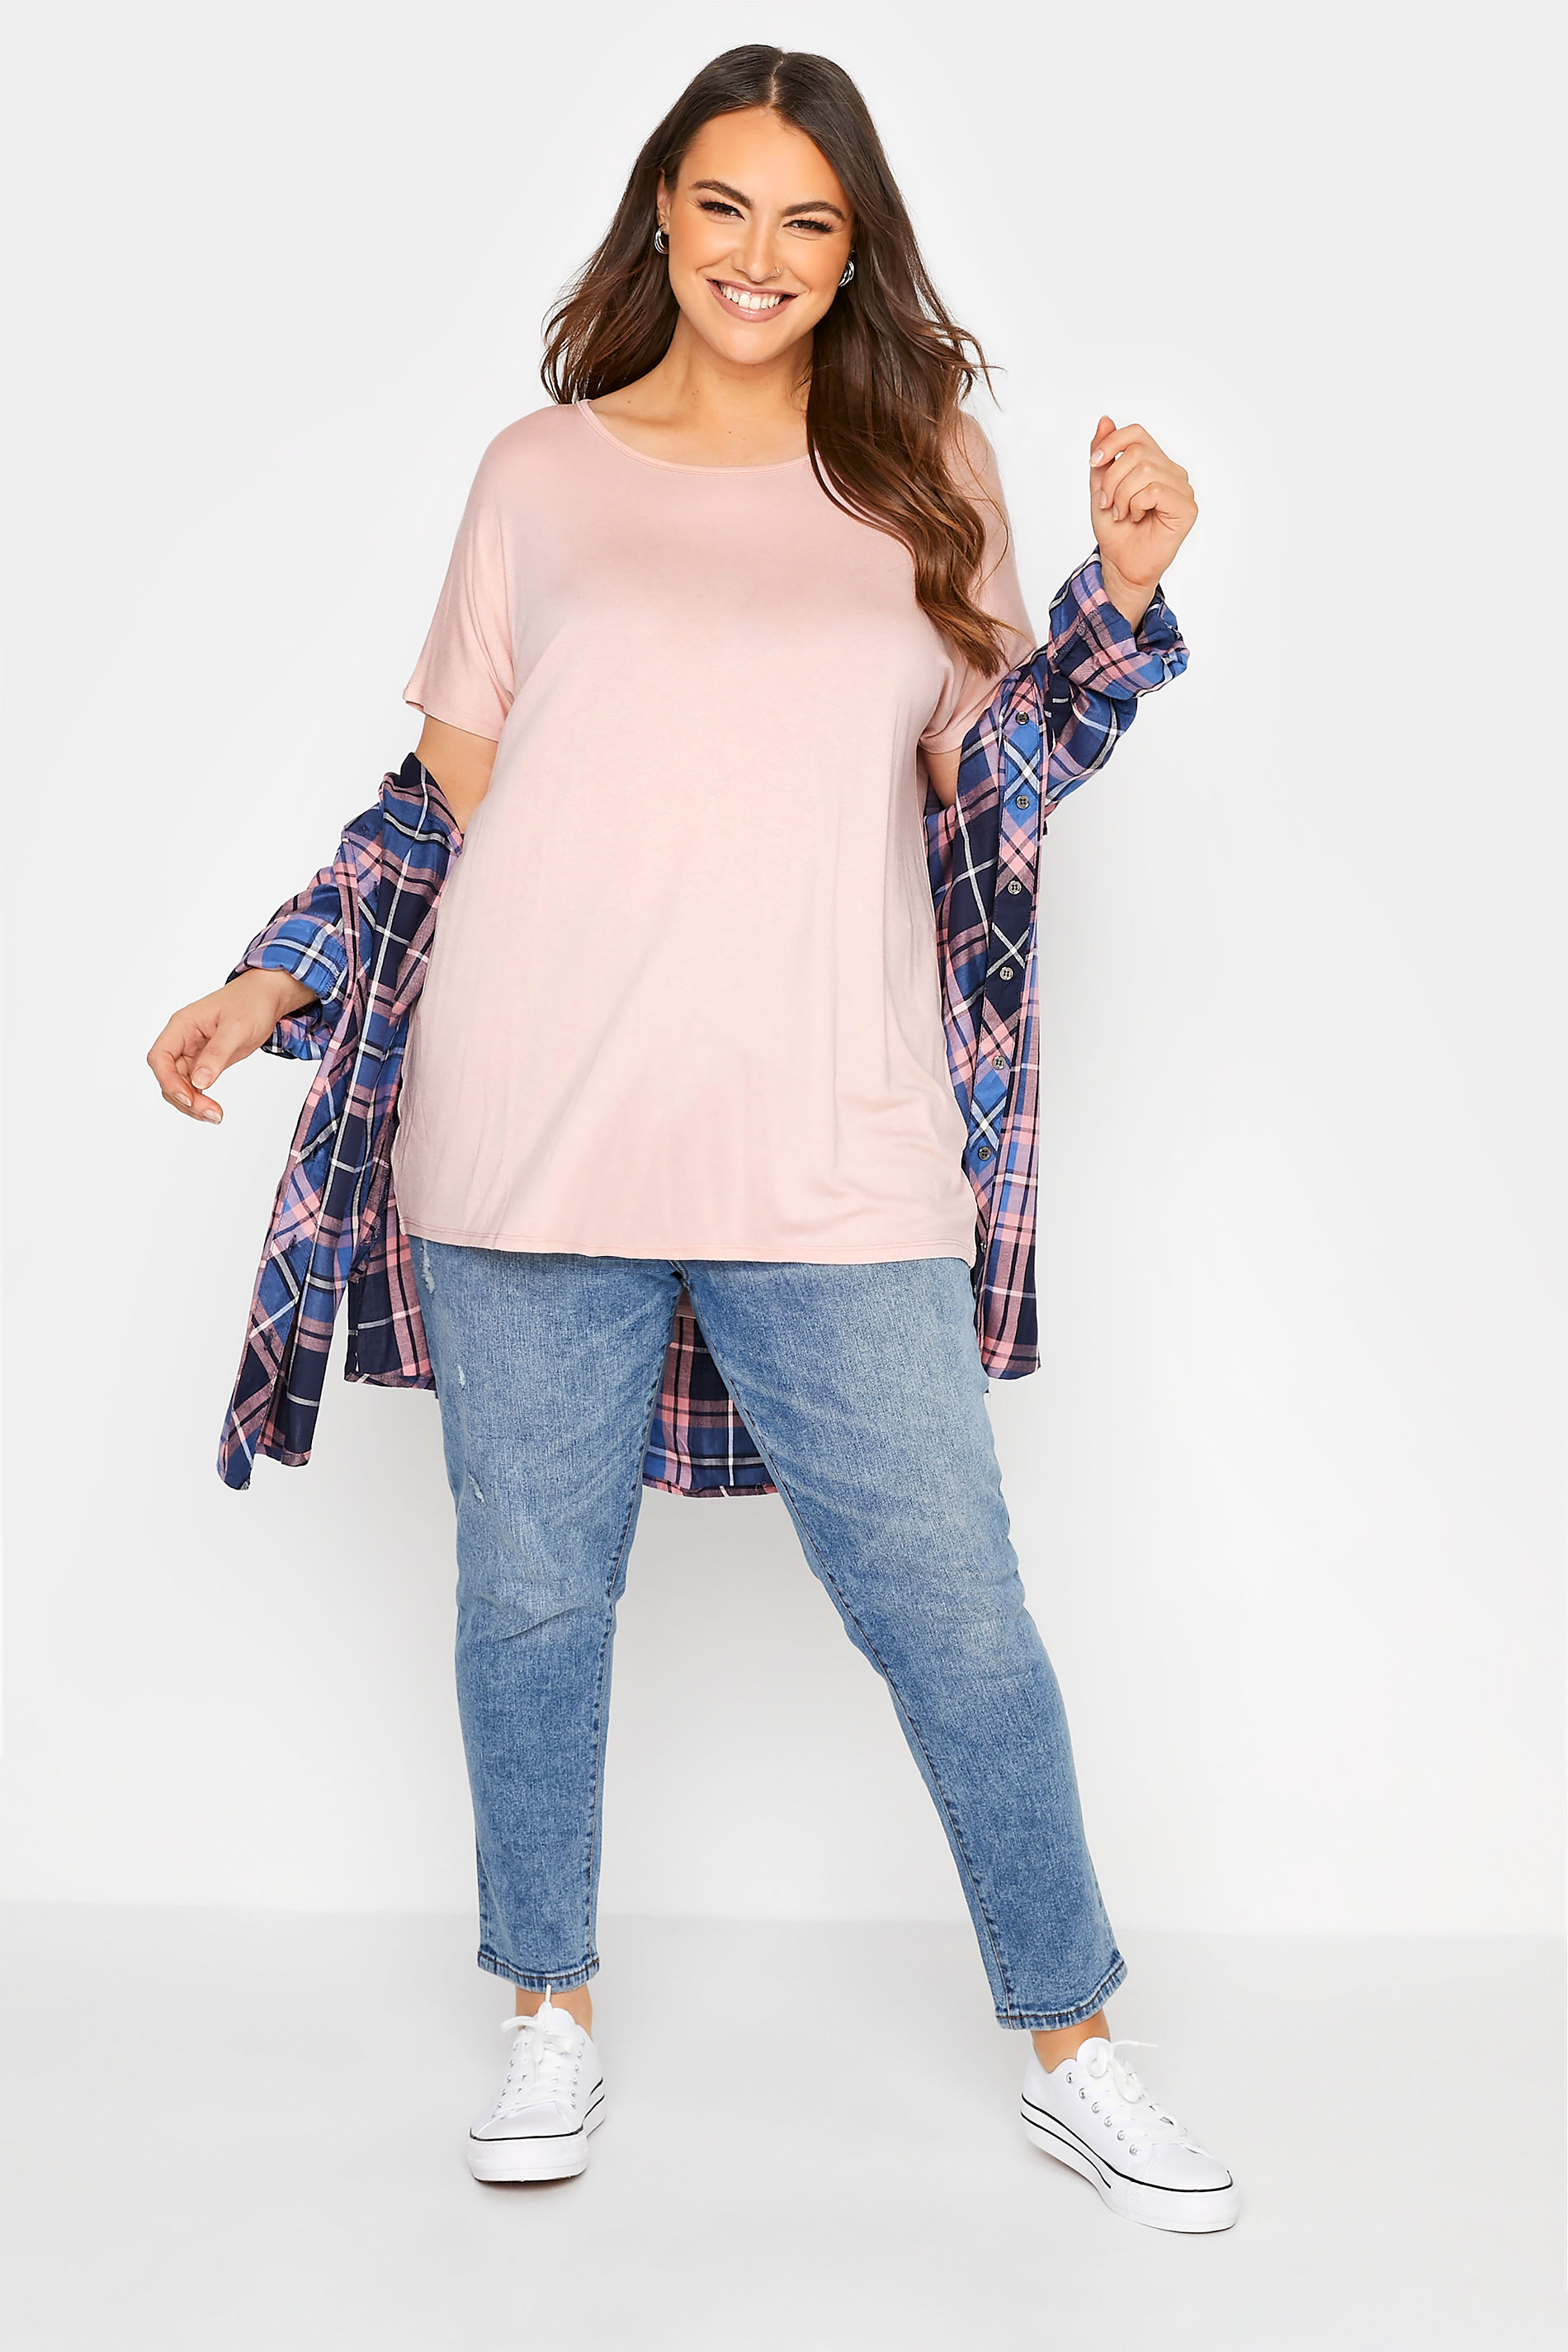 Grande taille  Tops Grande taille  T-Shirts | T-Shirt Rose Manches Courtes en Jersey - QG42483